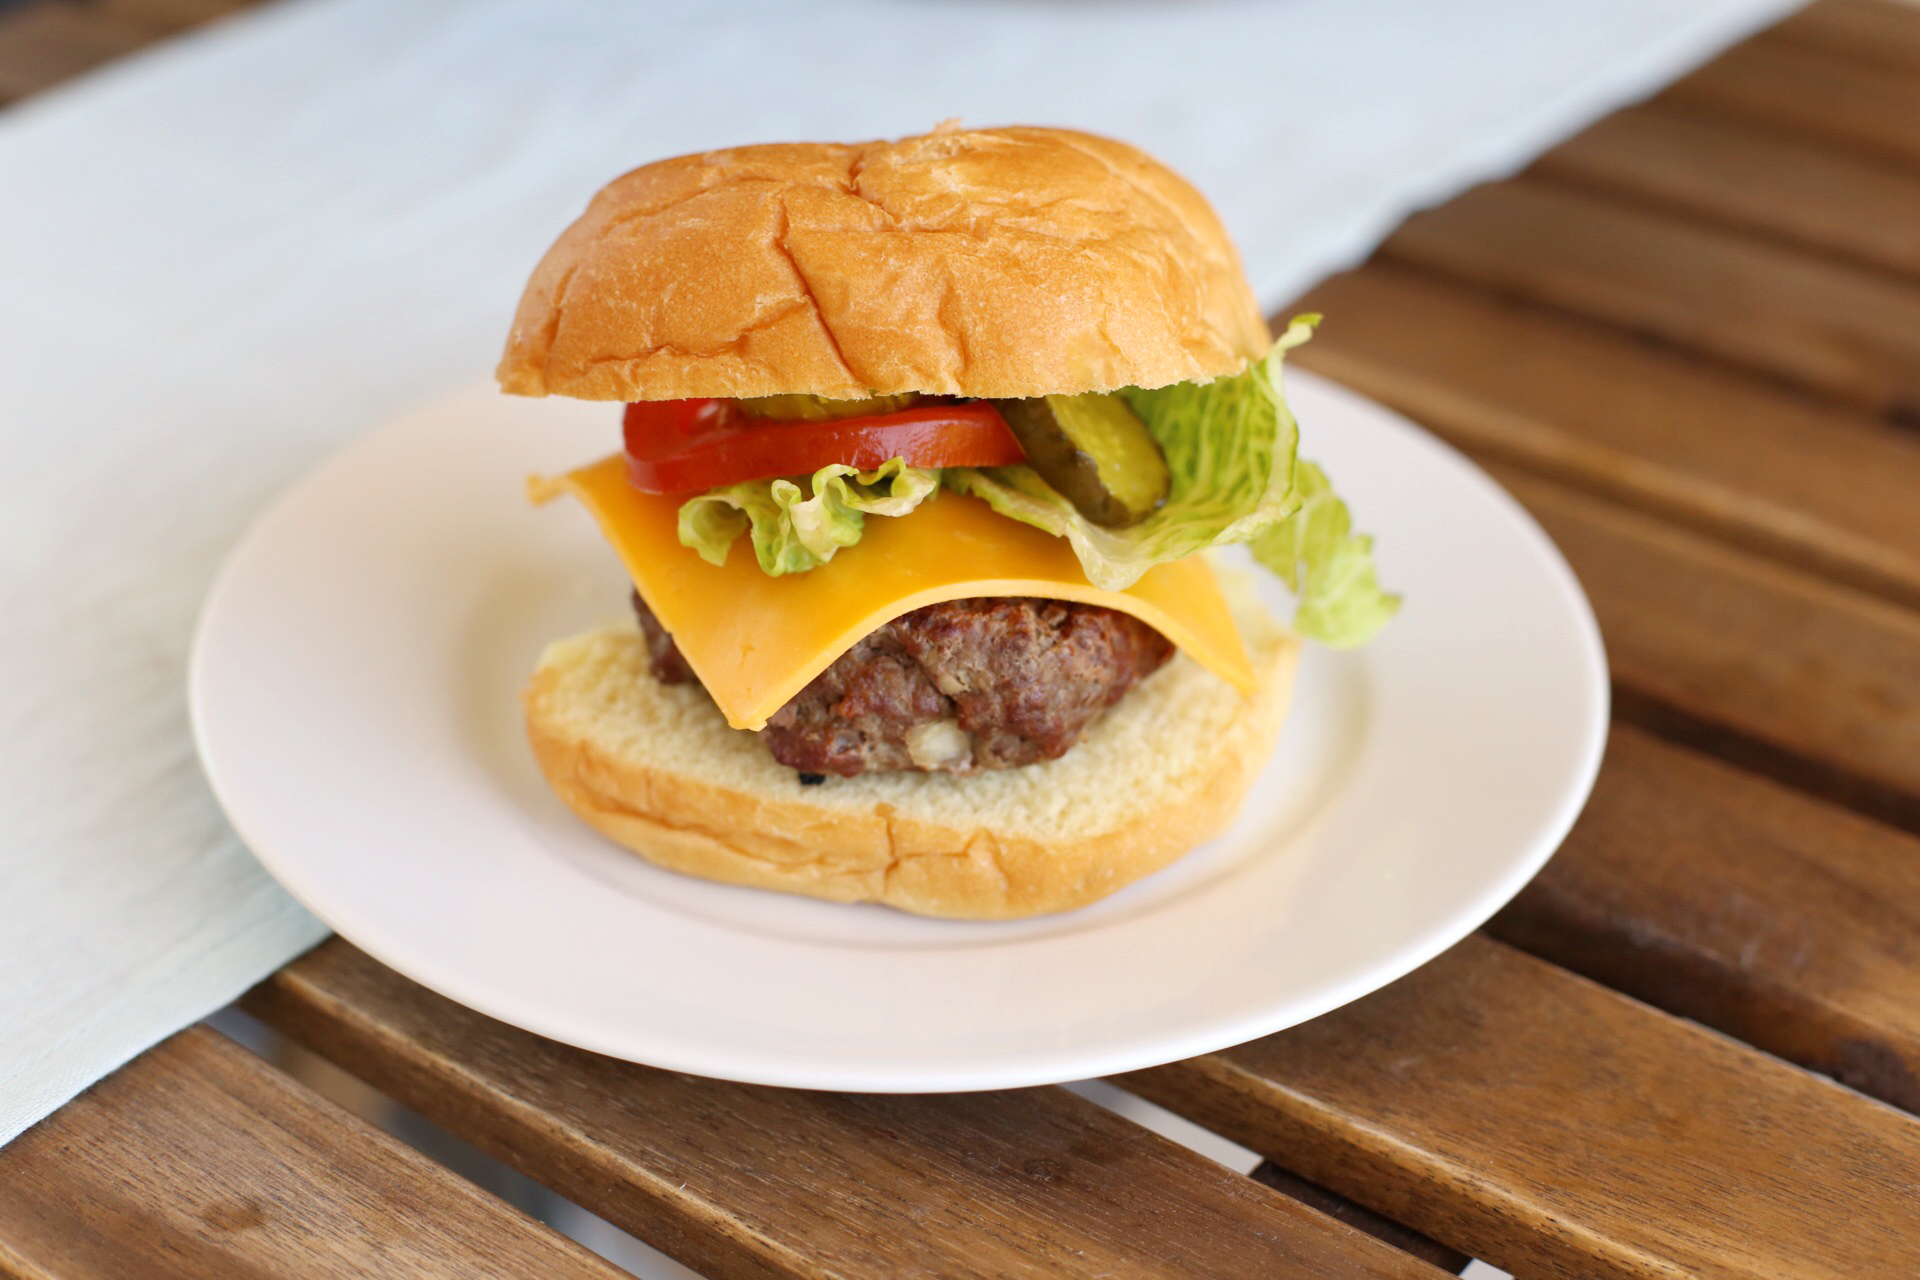 Summer Grilling Juicy Grilled Beef Burger Recipe Bluebird Chic